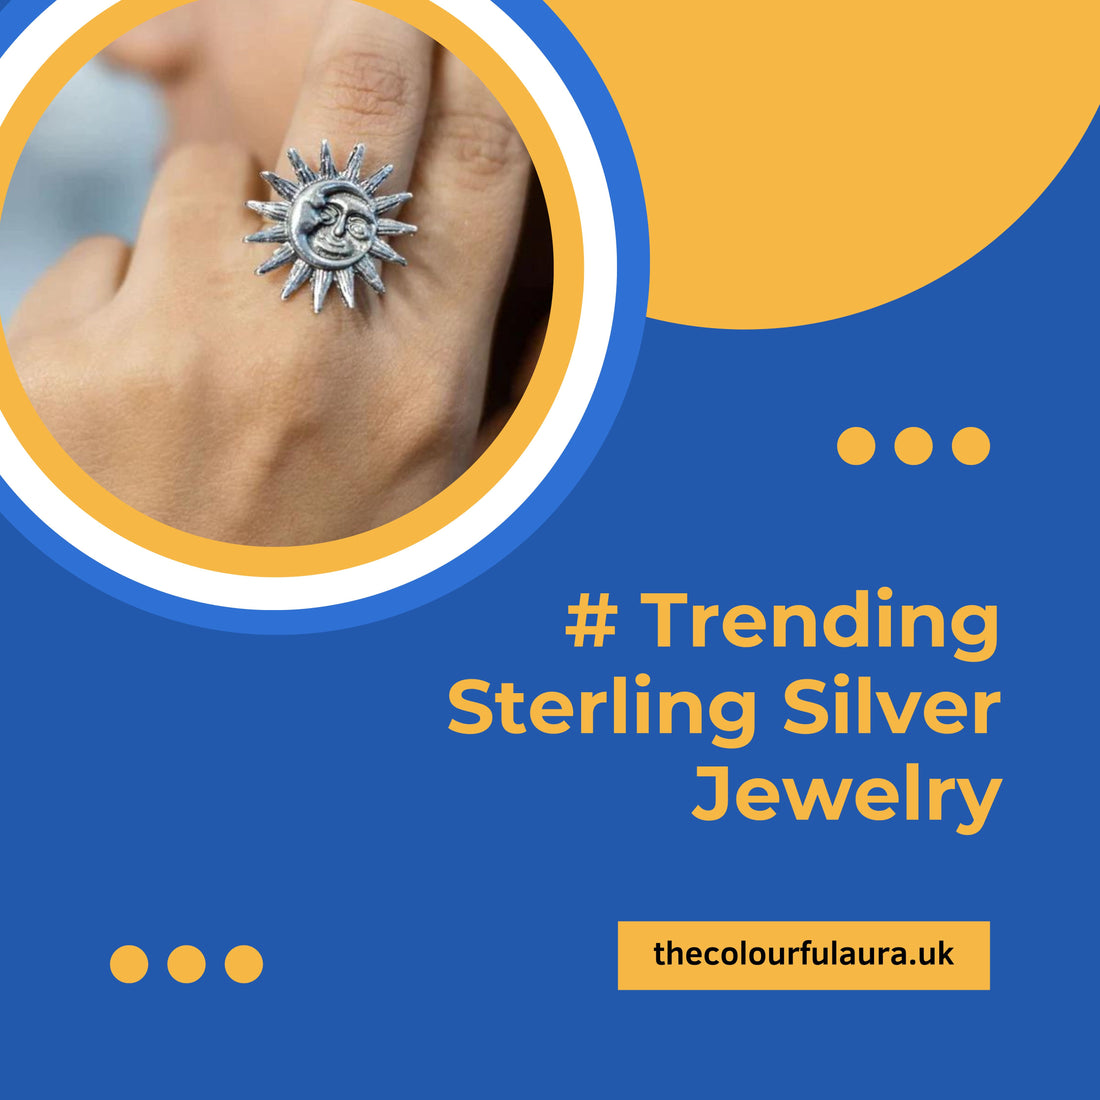 Best Sterling Silver Jewelry to wear in 2022 under 10 Pounds